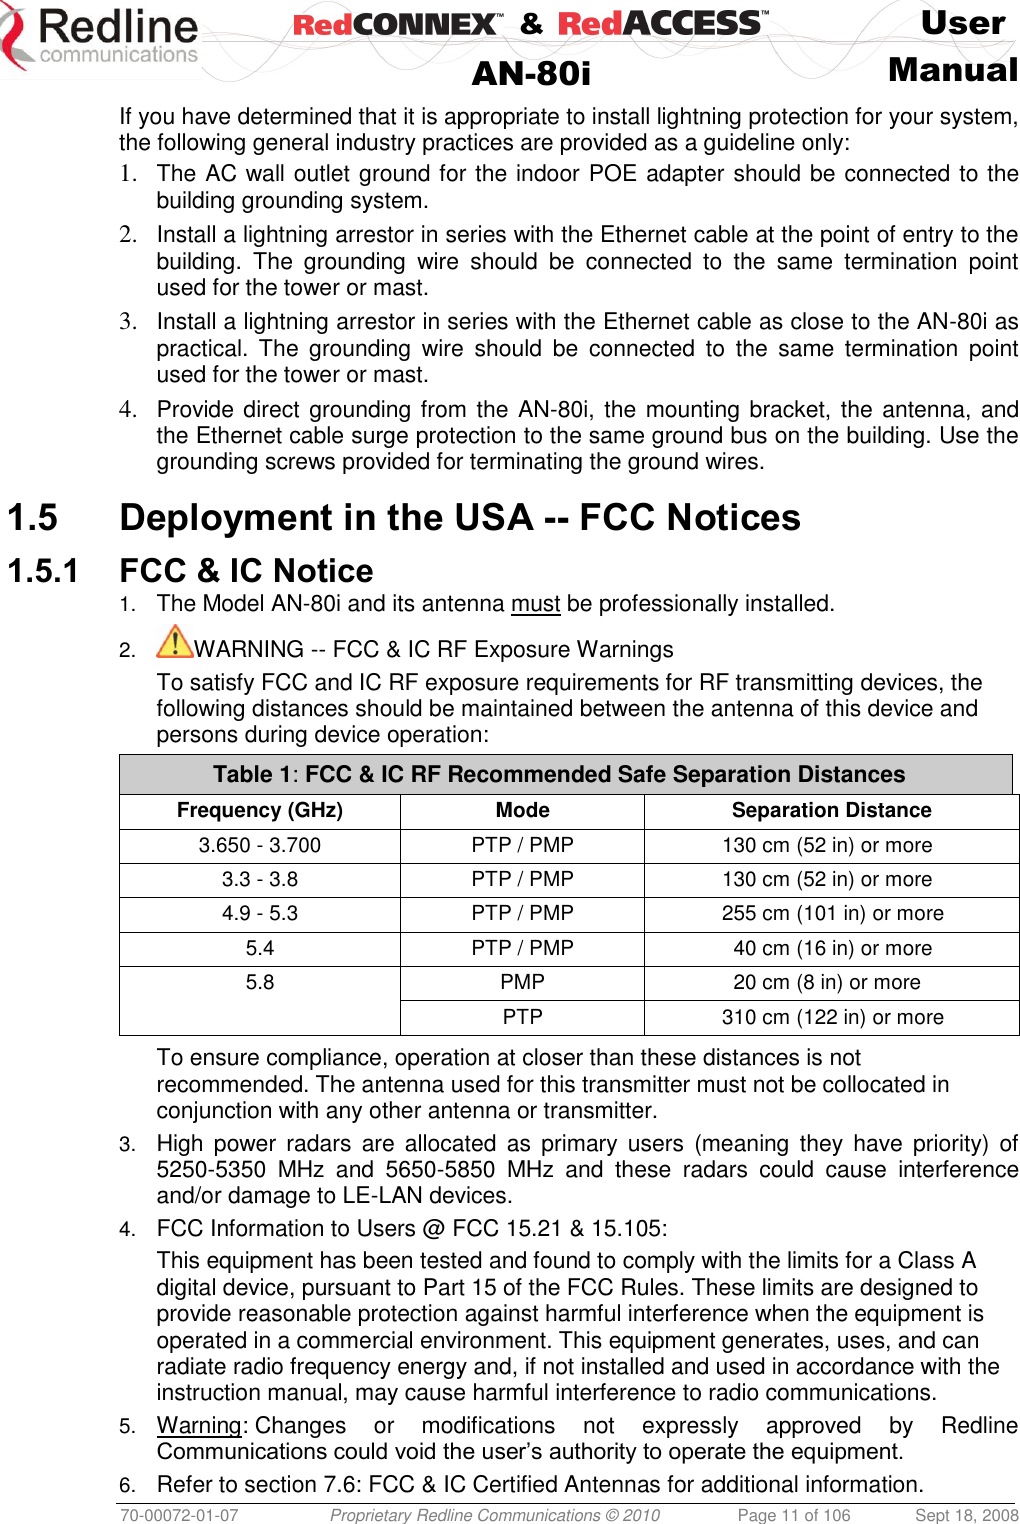    &amp;  User  AN-80i Manual  70-00072-01-07 Proprietary Redline Communications © 2010  Page 11 of 106  Sept 18, 2008 If you have determined that it is appropriate to install lightning protection for your system, the following general industry practices are provided as a guideline only: 1. The AC wall outlet ground for the indoor POE adapter should be connected to the building grounding system. 2. Install a lightning arrestor in series with the Ethernet cable at the point of entry to the building.  The  grounding  wire  should  be  connected  to  the  same  termination  point used for the tower or mast. 3. Install a lightning arrestor in series with the Ethernet cable as close to the AN-80i as practical.  The  grounding  wire  should  be  connected  to  the  same  termination  point used for the tower or mast. 4. Provide direct grounding from the AN-80i, the mounting bracket, the antenna, and the Ethernet cable surge protection to the same ground bus on the building. Use the grounding screws provided for terminating the ground wires.  1.5 Deployment in the USA -- FCC Notices 1.5.1 FCC &amp; IC Notice 1. The Model AN-80i and its antenna must be professionally installed. 2. WARNING -- FCC &amp; IC RF Exposure Warnings To satisfy FCC and IC RF exposure requirements for RF transmitting devices, the following distances should be maintained between the antenna of this device and persons during device operation: Table 1: FCC &amp; IC RF Recommended Safe Separation Distances  Frequency (GHz) Mode Separation Distance 3.650 - 3.700 PTP / PMP 130 cm (52 in) or more 3.3 - 3.8 PTP / PMP 130 cm (52 in) or more 4.9 - 5.3 PTP / PMP 255 cm (101 in) or more 5.4 PTP / PMP 40 cm (16 in) or more 5.8 PMP 20 cm (8 in) or more  PTP 310 cm (122 in) or more  To ensure compliance, operation at closer than these distances is not recommended. The antenna used for this transmitter must not be collocated in conjunction with any other antenna or transmitter. 3. High  power  radars  are  allocated  as  primary  users  (meaning  they  have priority) of 5250-5350  MHz  and  5650-5850  MHz  and  these  radars  could  cause  interference and/or damage to LE-LAN devices. 4. FCC Information to Users @ FCC 15.21 &amp; 15.105: This equipment has been tested and found to comply with the limits for a Class A digital device, pursuant to Part 15 of the FCC Rules. These limits are designed to provide reasonable protection against harmful interference when the equipment is operated in a commercial environment. This equipment generates, uses, and can radiate radio frequency energy and, if not installed and used in accordance with the instruction manual, may cause harmful interference to radio communications. 5. Warning: Changes  or  modifications  not  expressly  approved  by  Redline Communications could void the user’s authority to operate the equipment. 6. Refer to section 7.6: FCC &amp; IC Certified Antennas for additional information. 